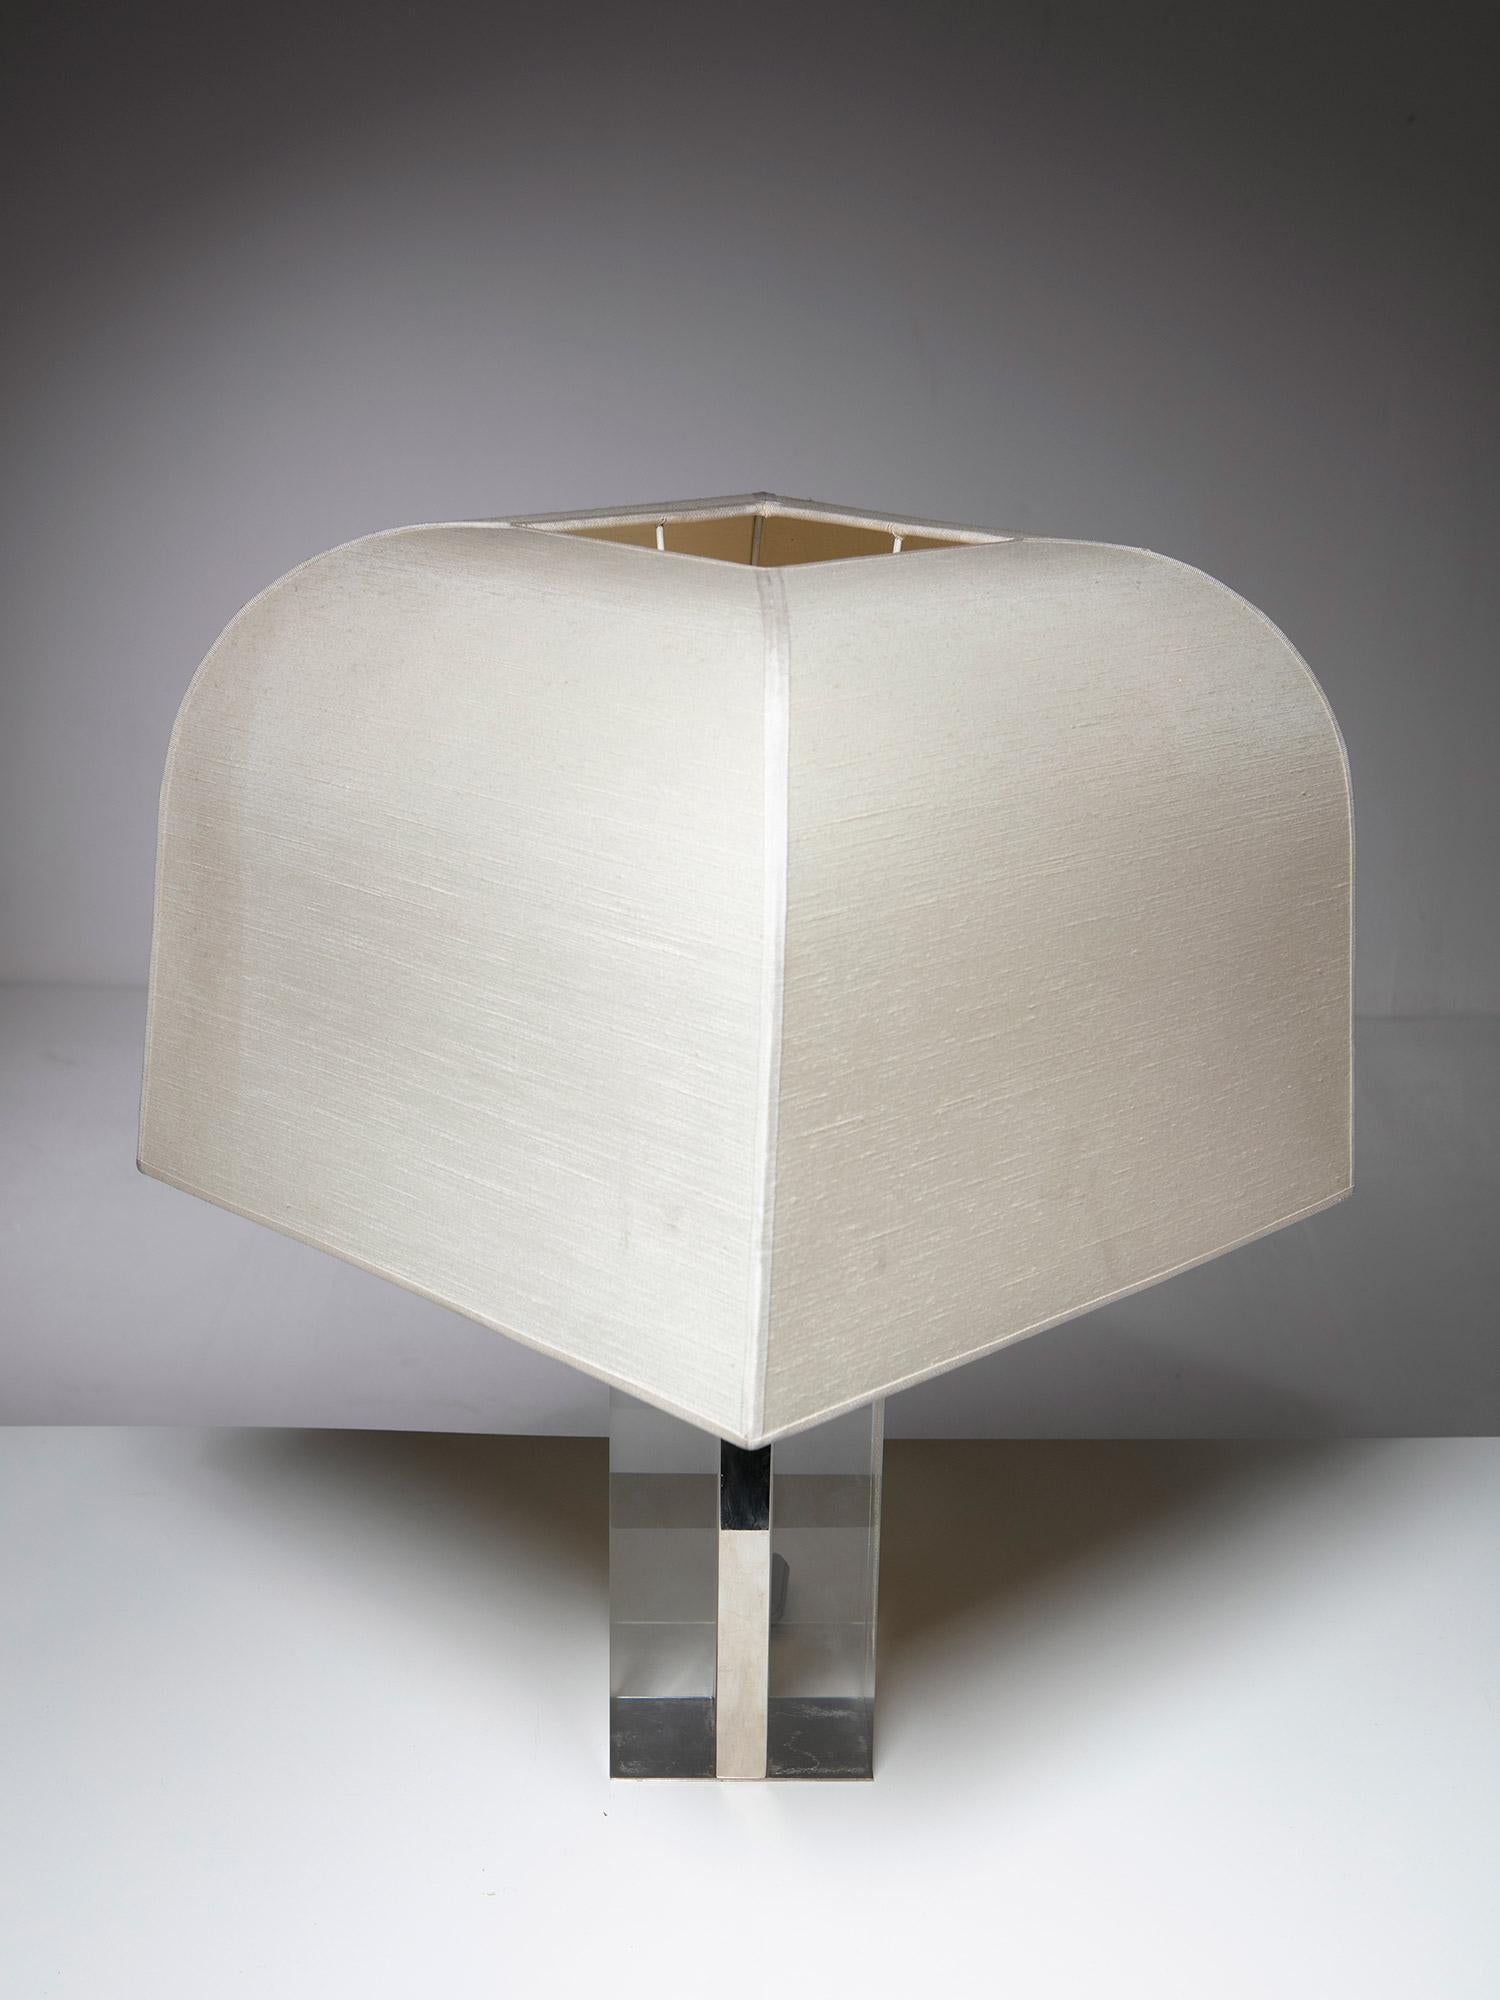 Mid-20th Century Chrome and Plexiglass Table Lamp, Italy, 1960s For Sale